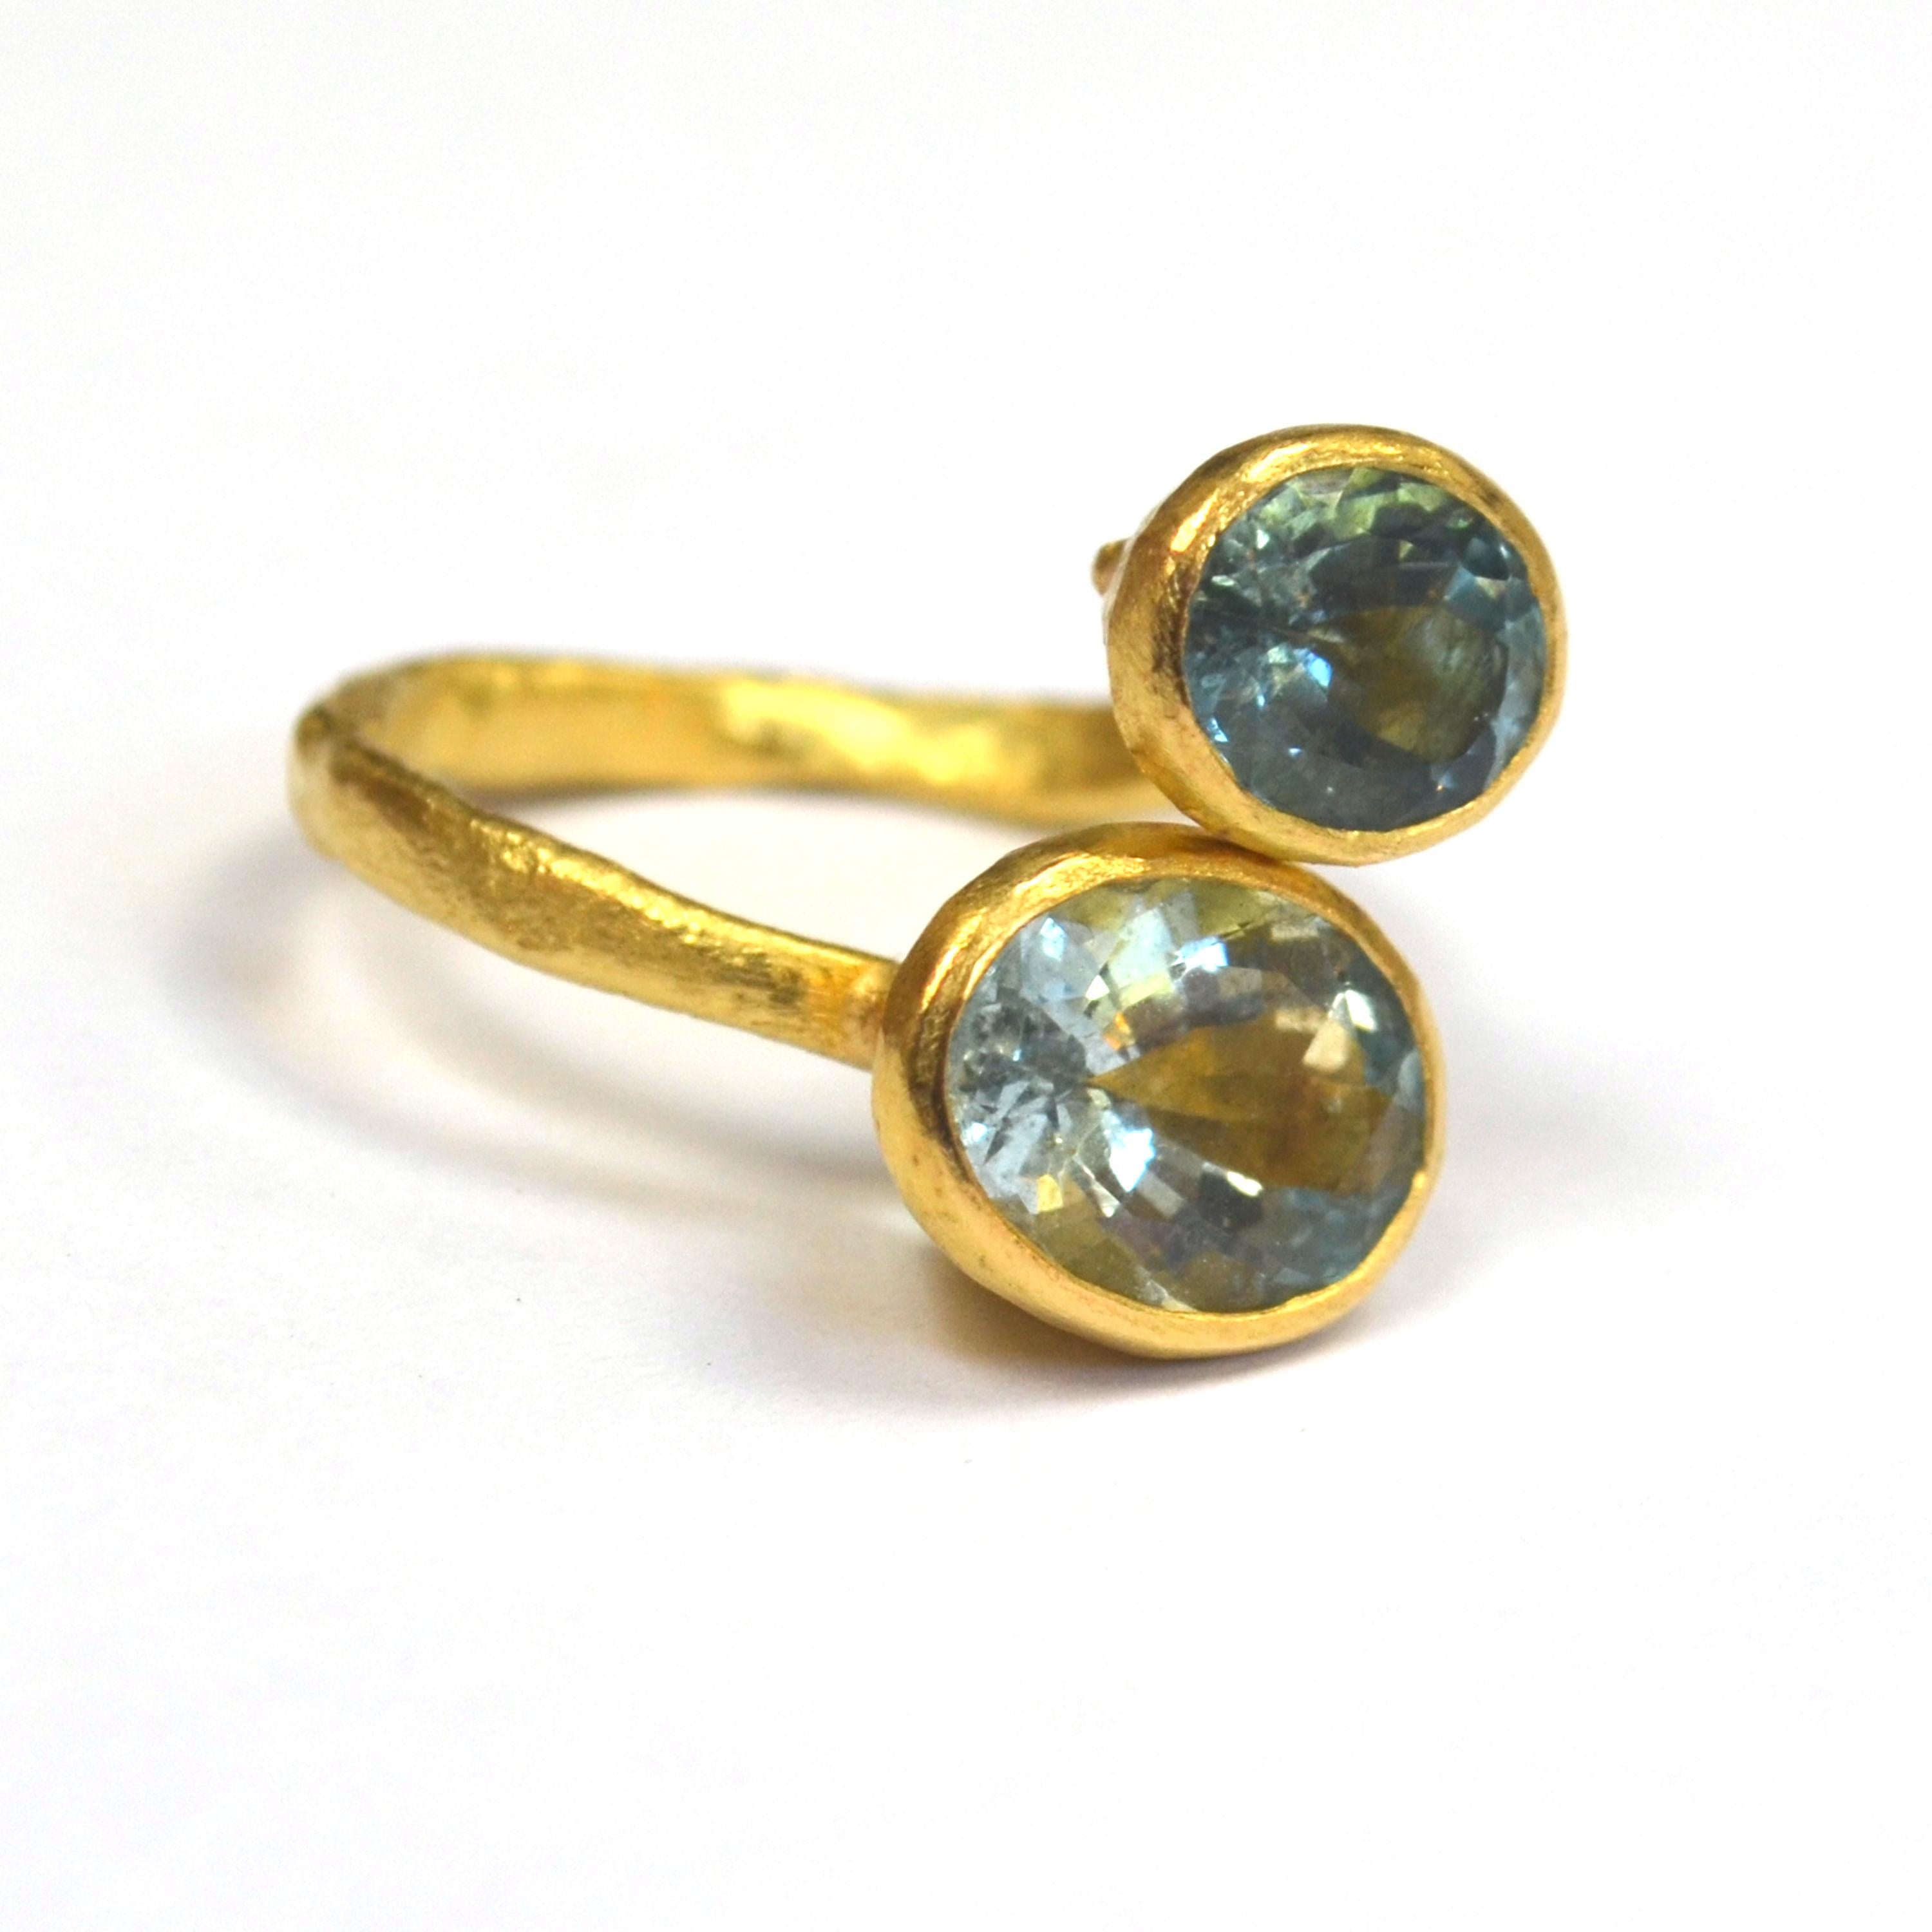 Contemporary Double Oval Aquamarine 18 Karat Gold Textured Ring Handmade by Disa Allsopp For Sale